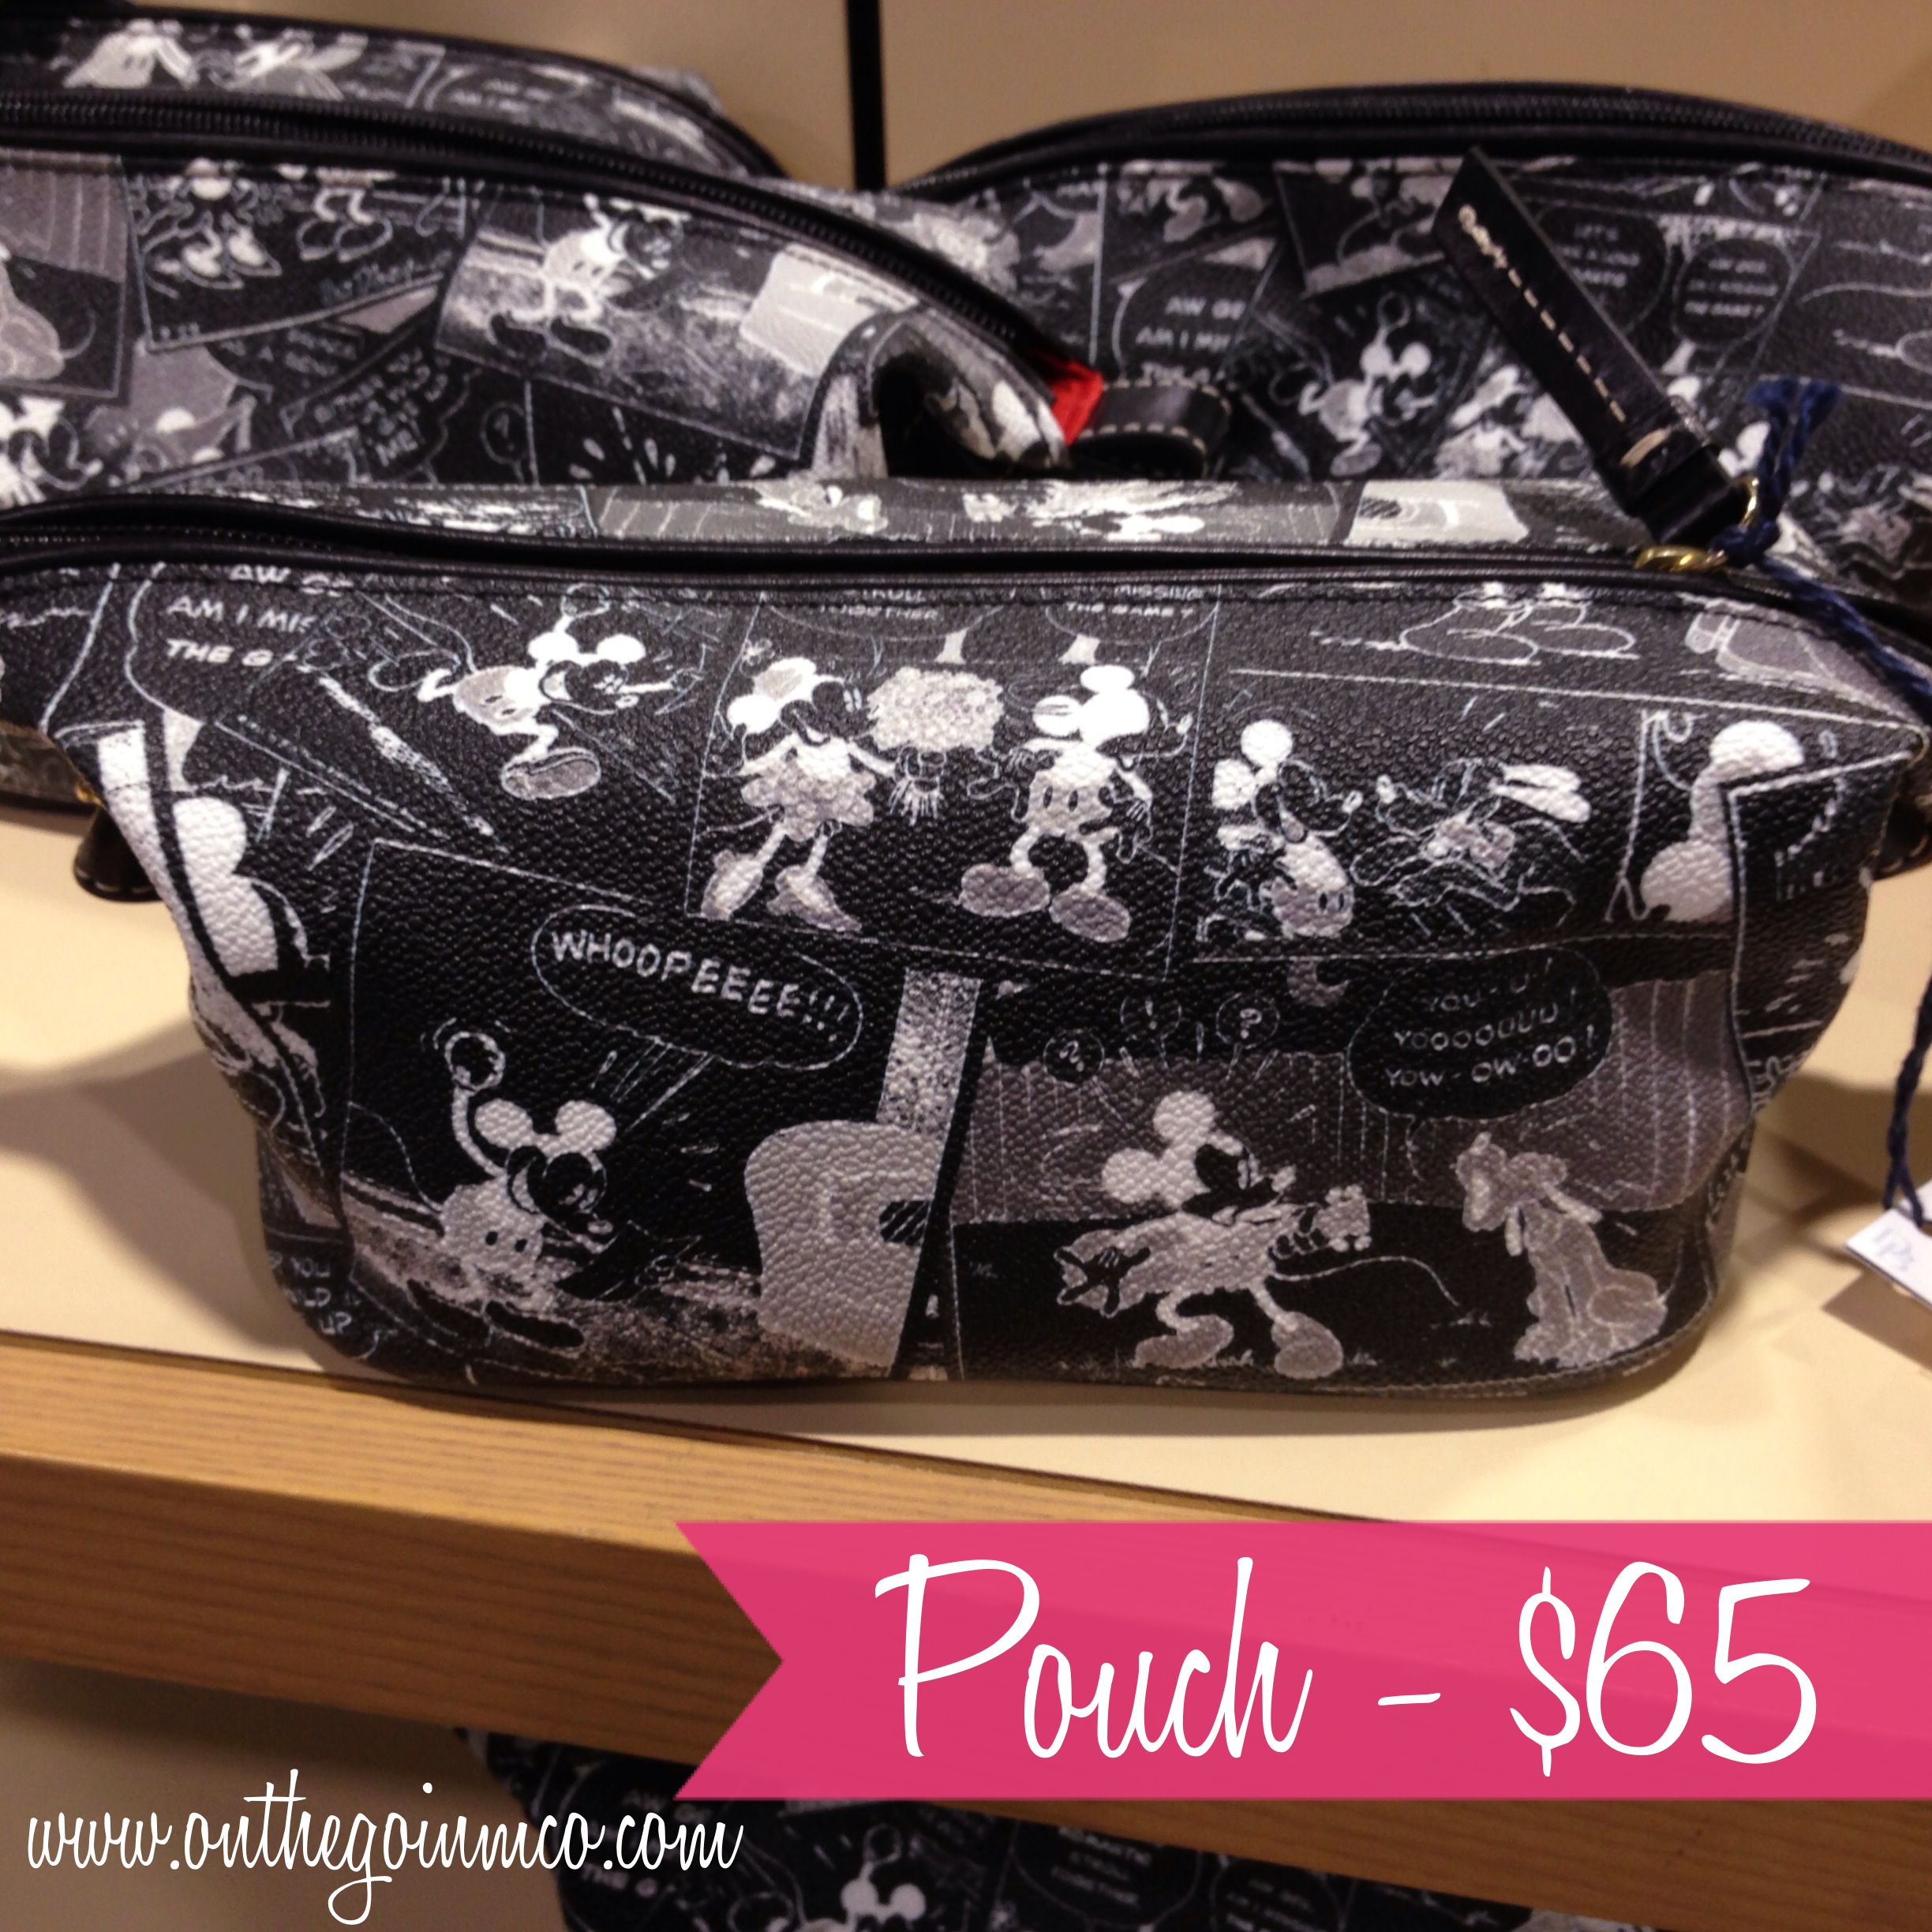 NEW Sketch Disney Dooney & Bourke Bags at MouseGear In EPCOT 